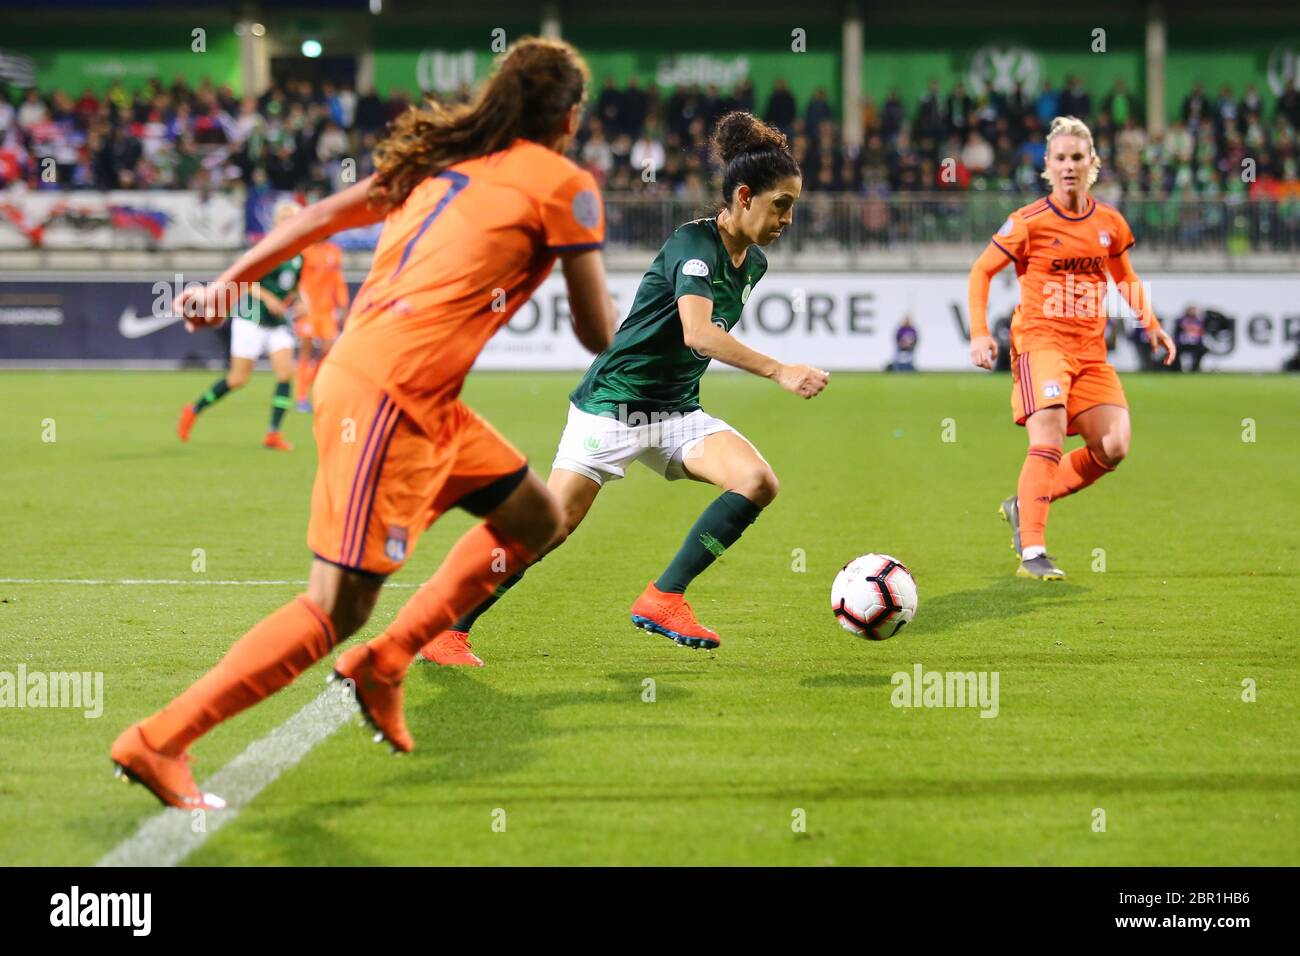 Wolfsburg, Germany, March 27, 2019:Female soccer player, Claudia Neto, in action during Uefa Champions League match against Olympique Lyon. Stock Photo